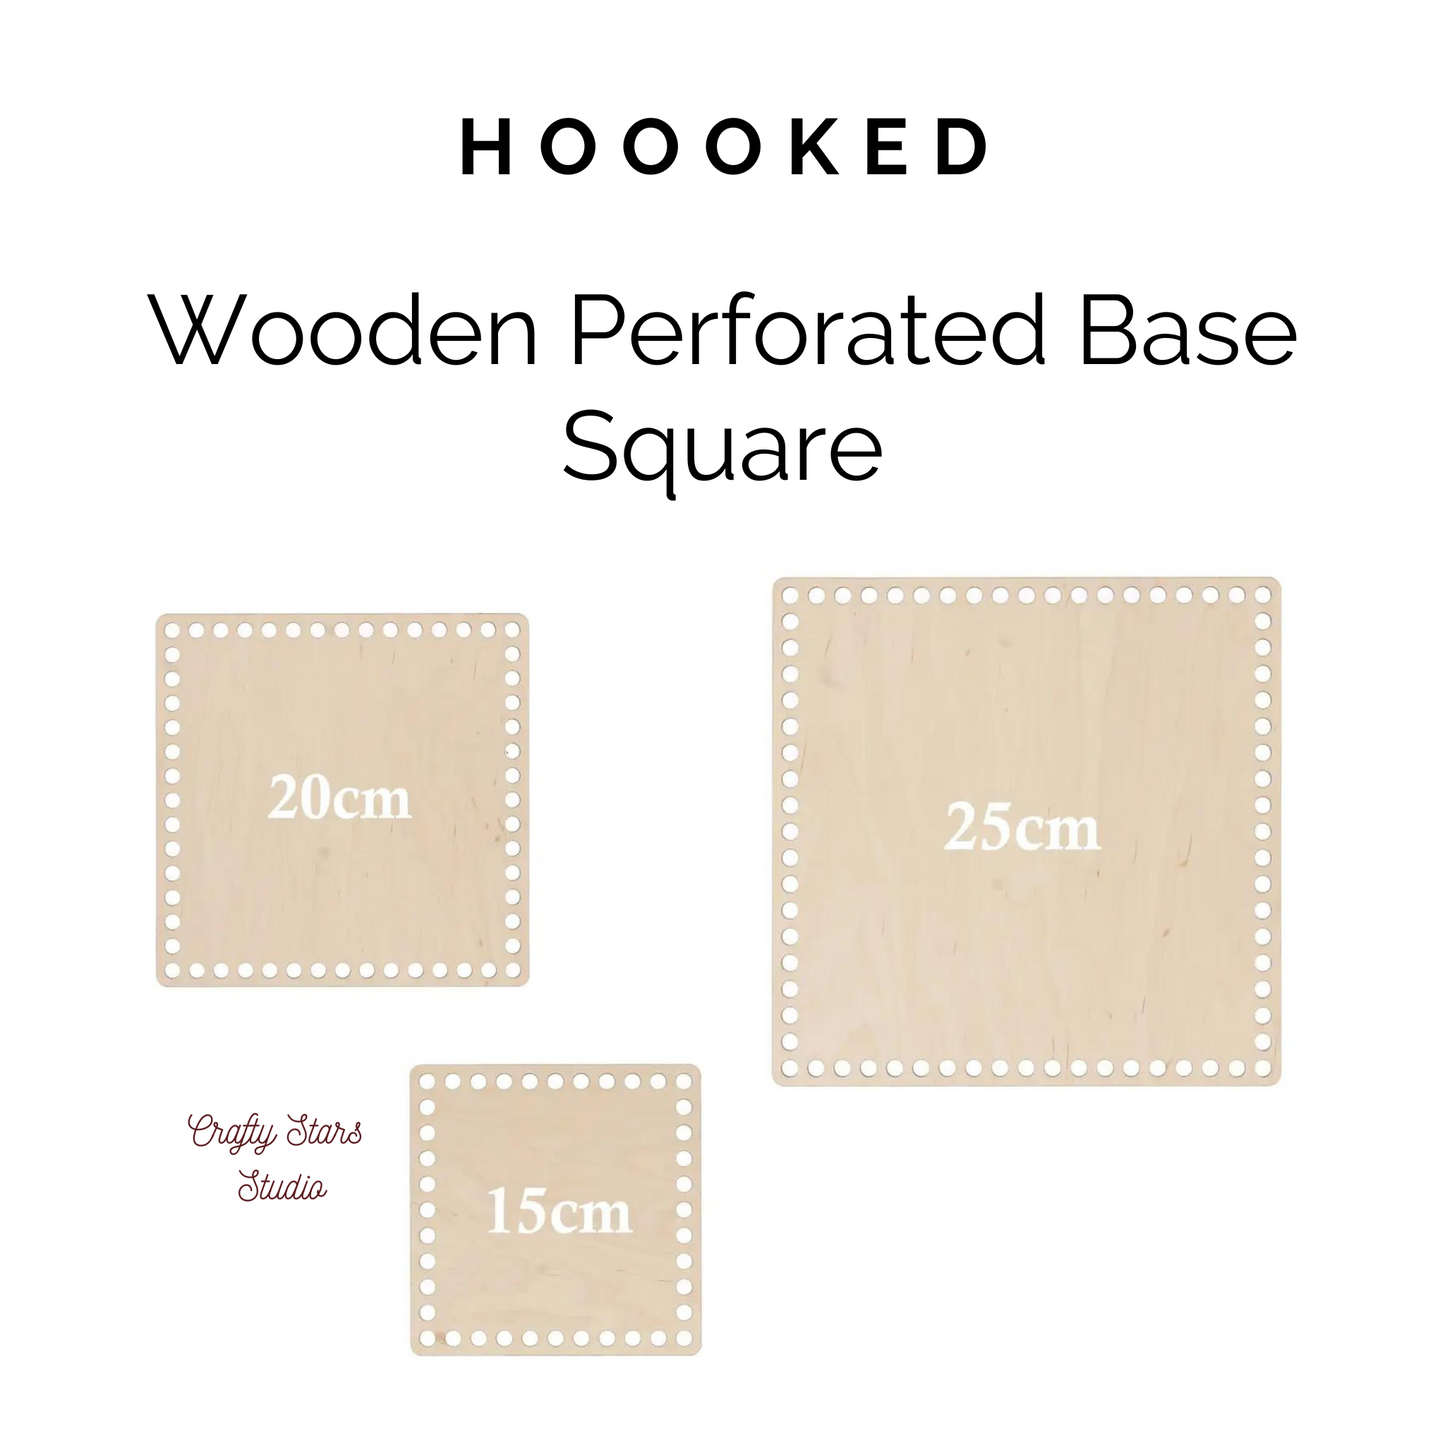 Wooden Perforated Bases [Round, Square, Oval, and Rectangle]